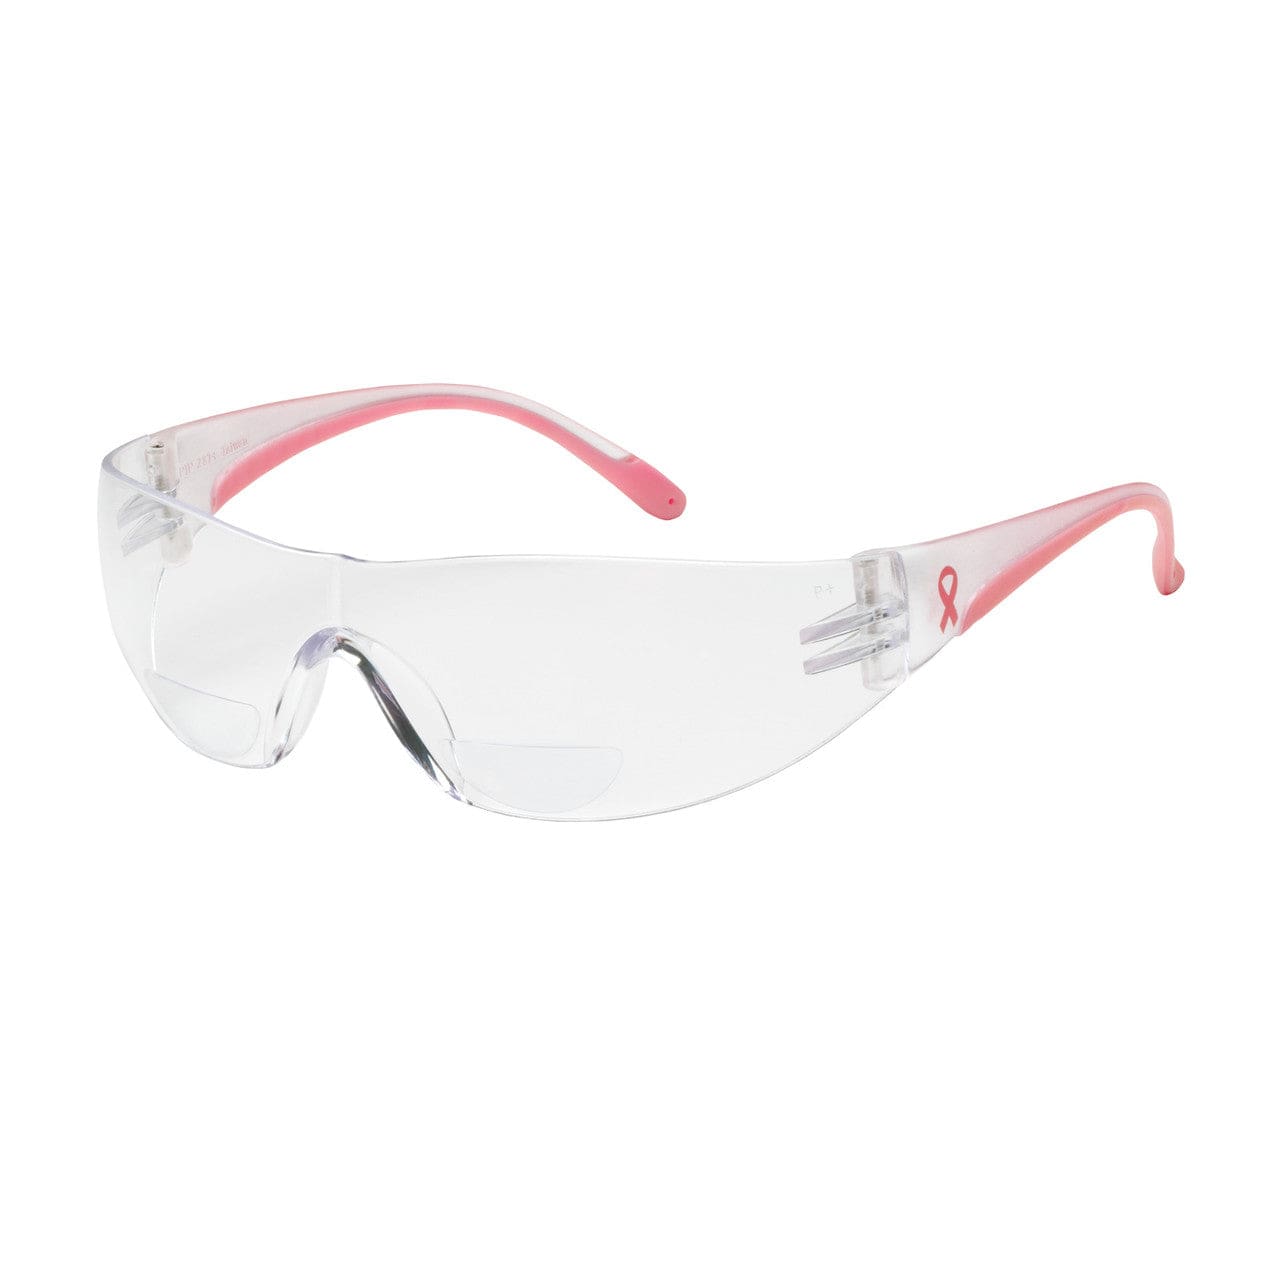 Bouton Eva Women's Bifocal Safety Glasses with Pink Temple Trim and Clear Anti-Fog Lens